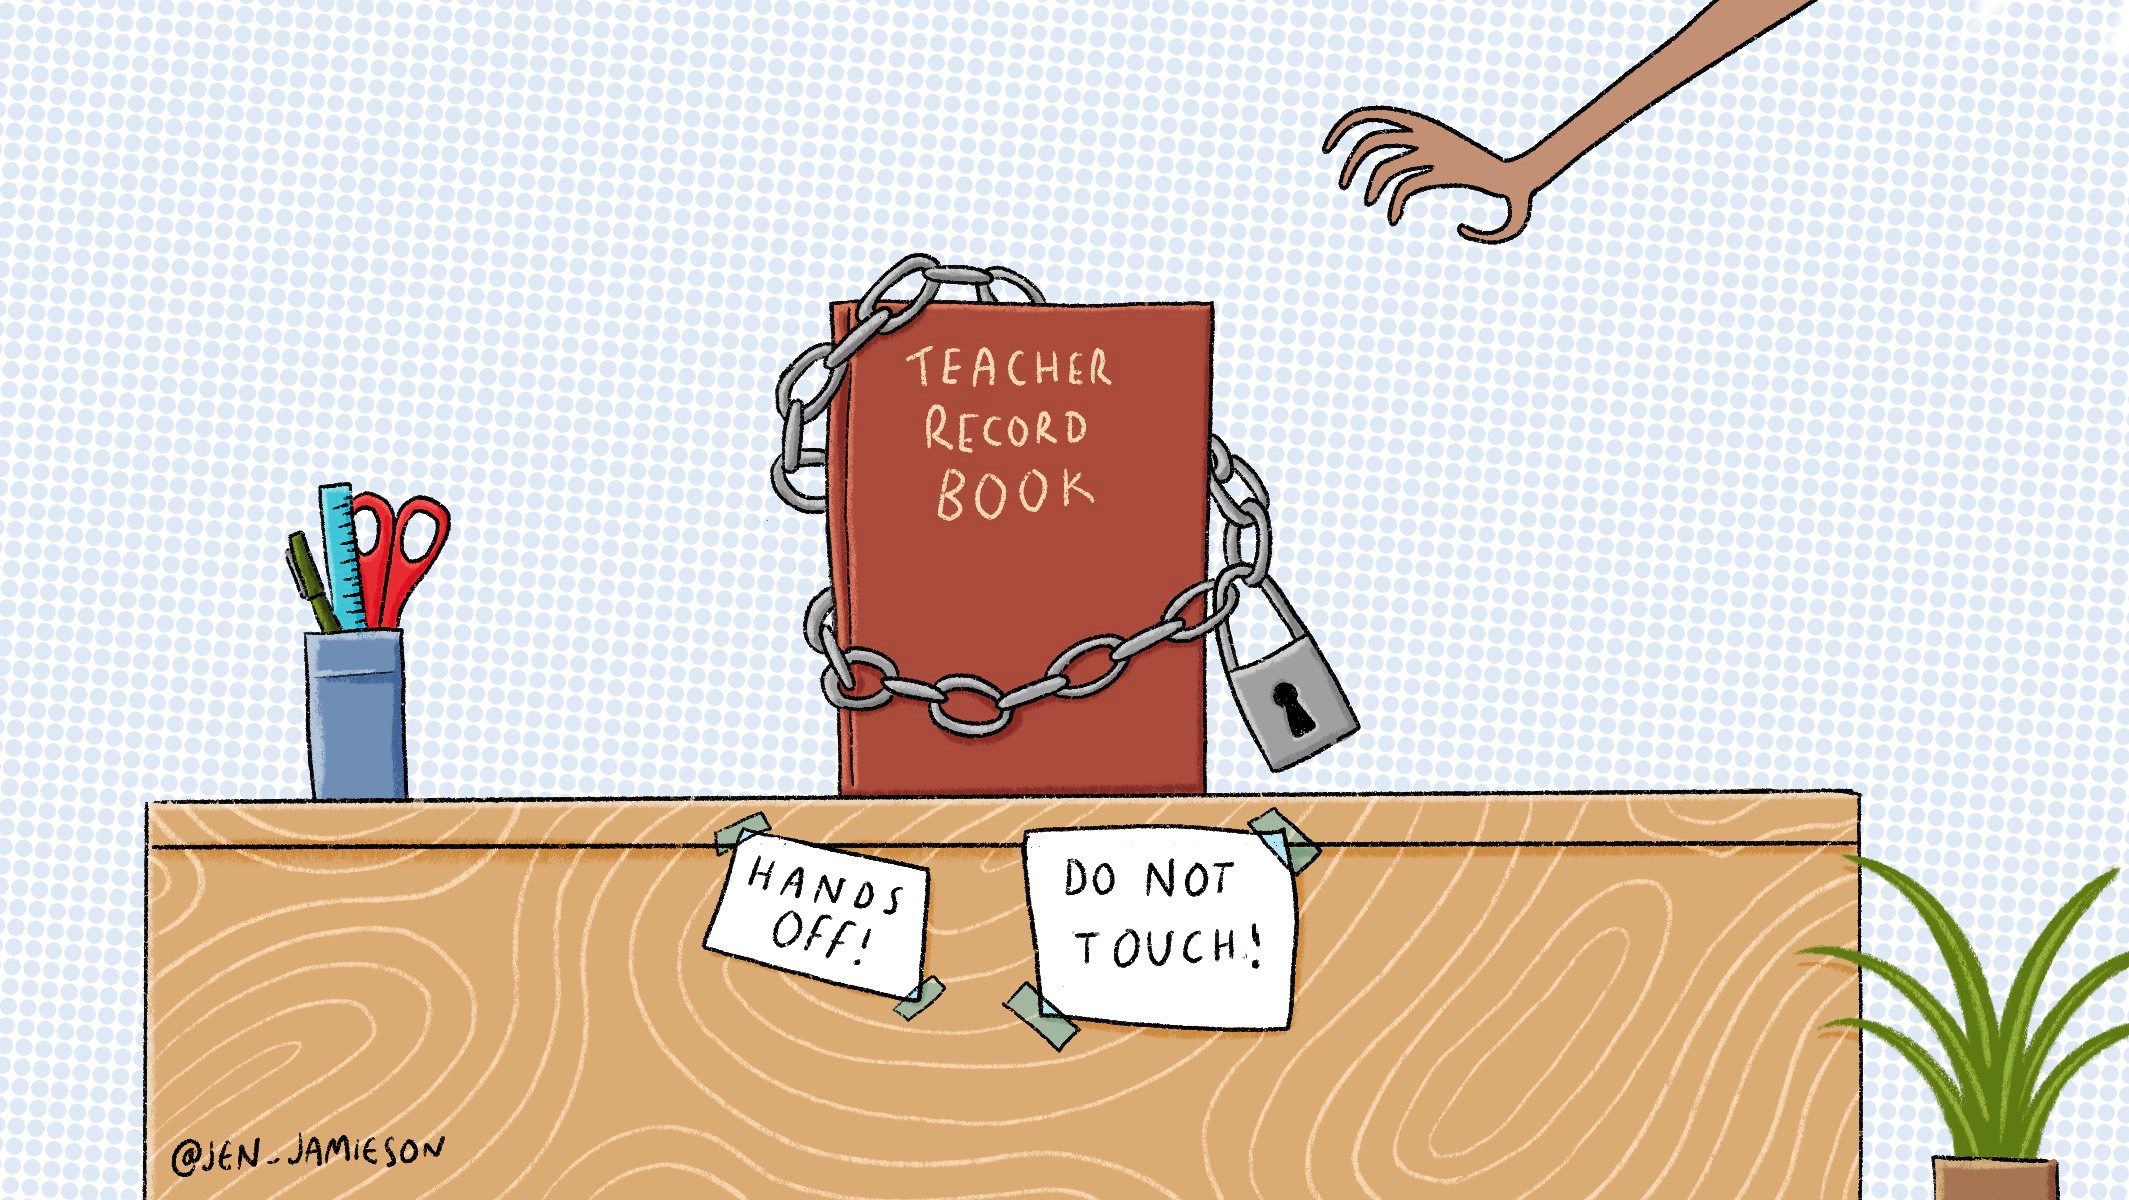 Illustration of a chained up gradebook on a desk with a hand reaching toward it